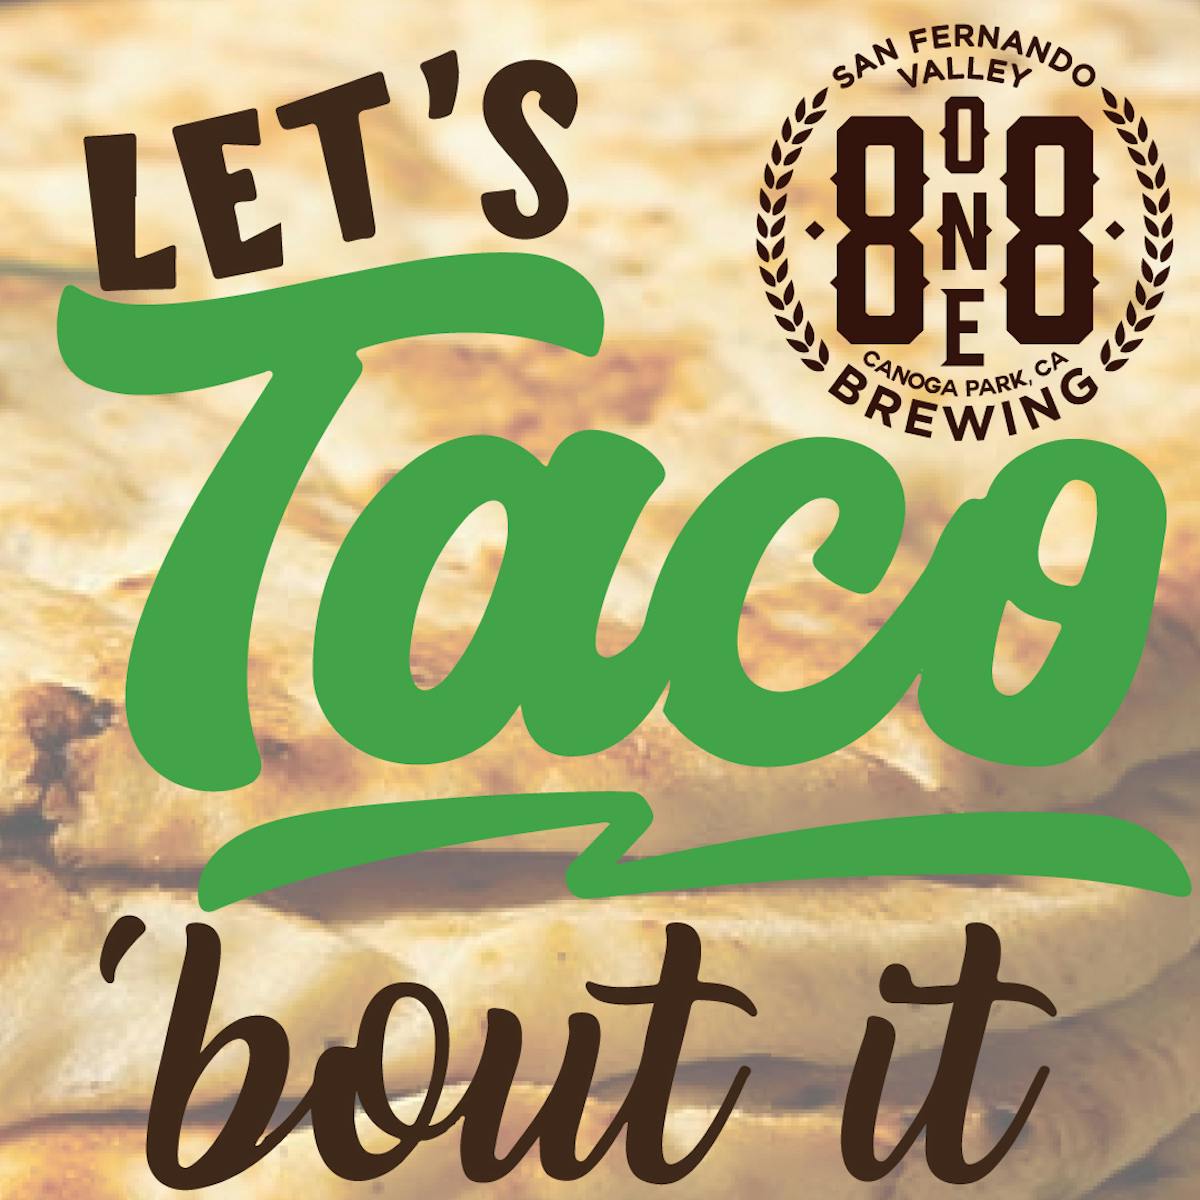 Let's Taco 'bout it Taco Tuesday in the San Fernando Valley Brewery